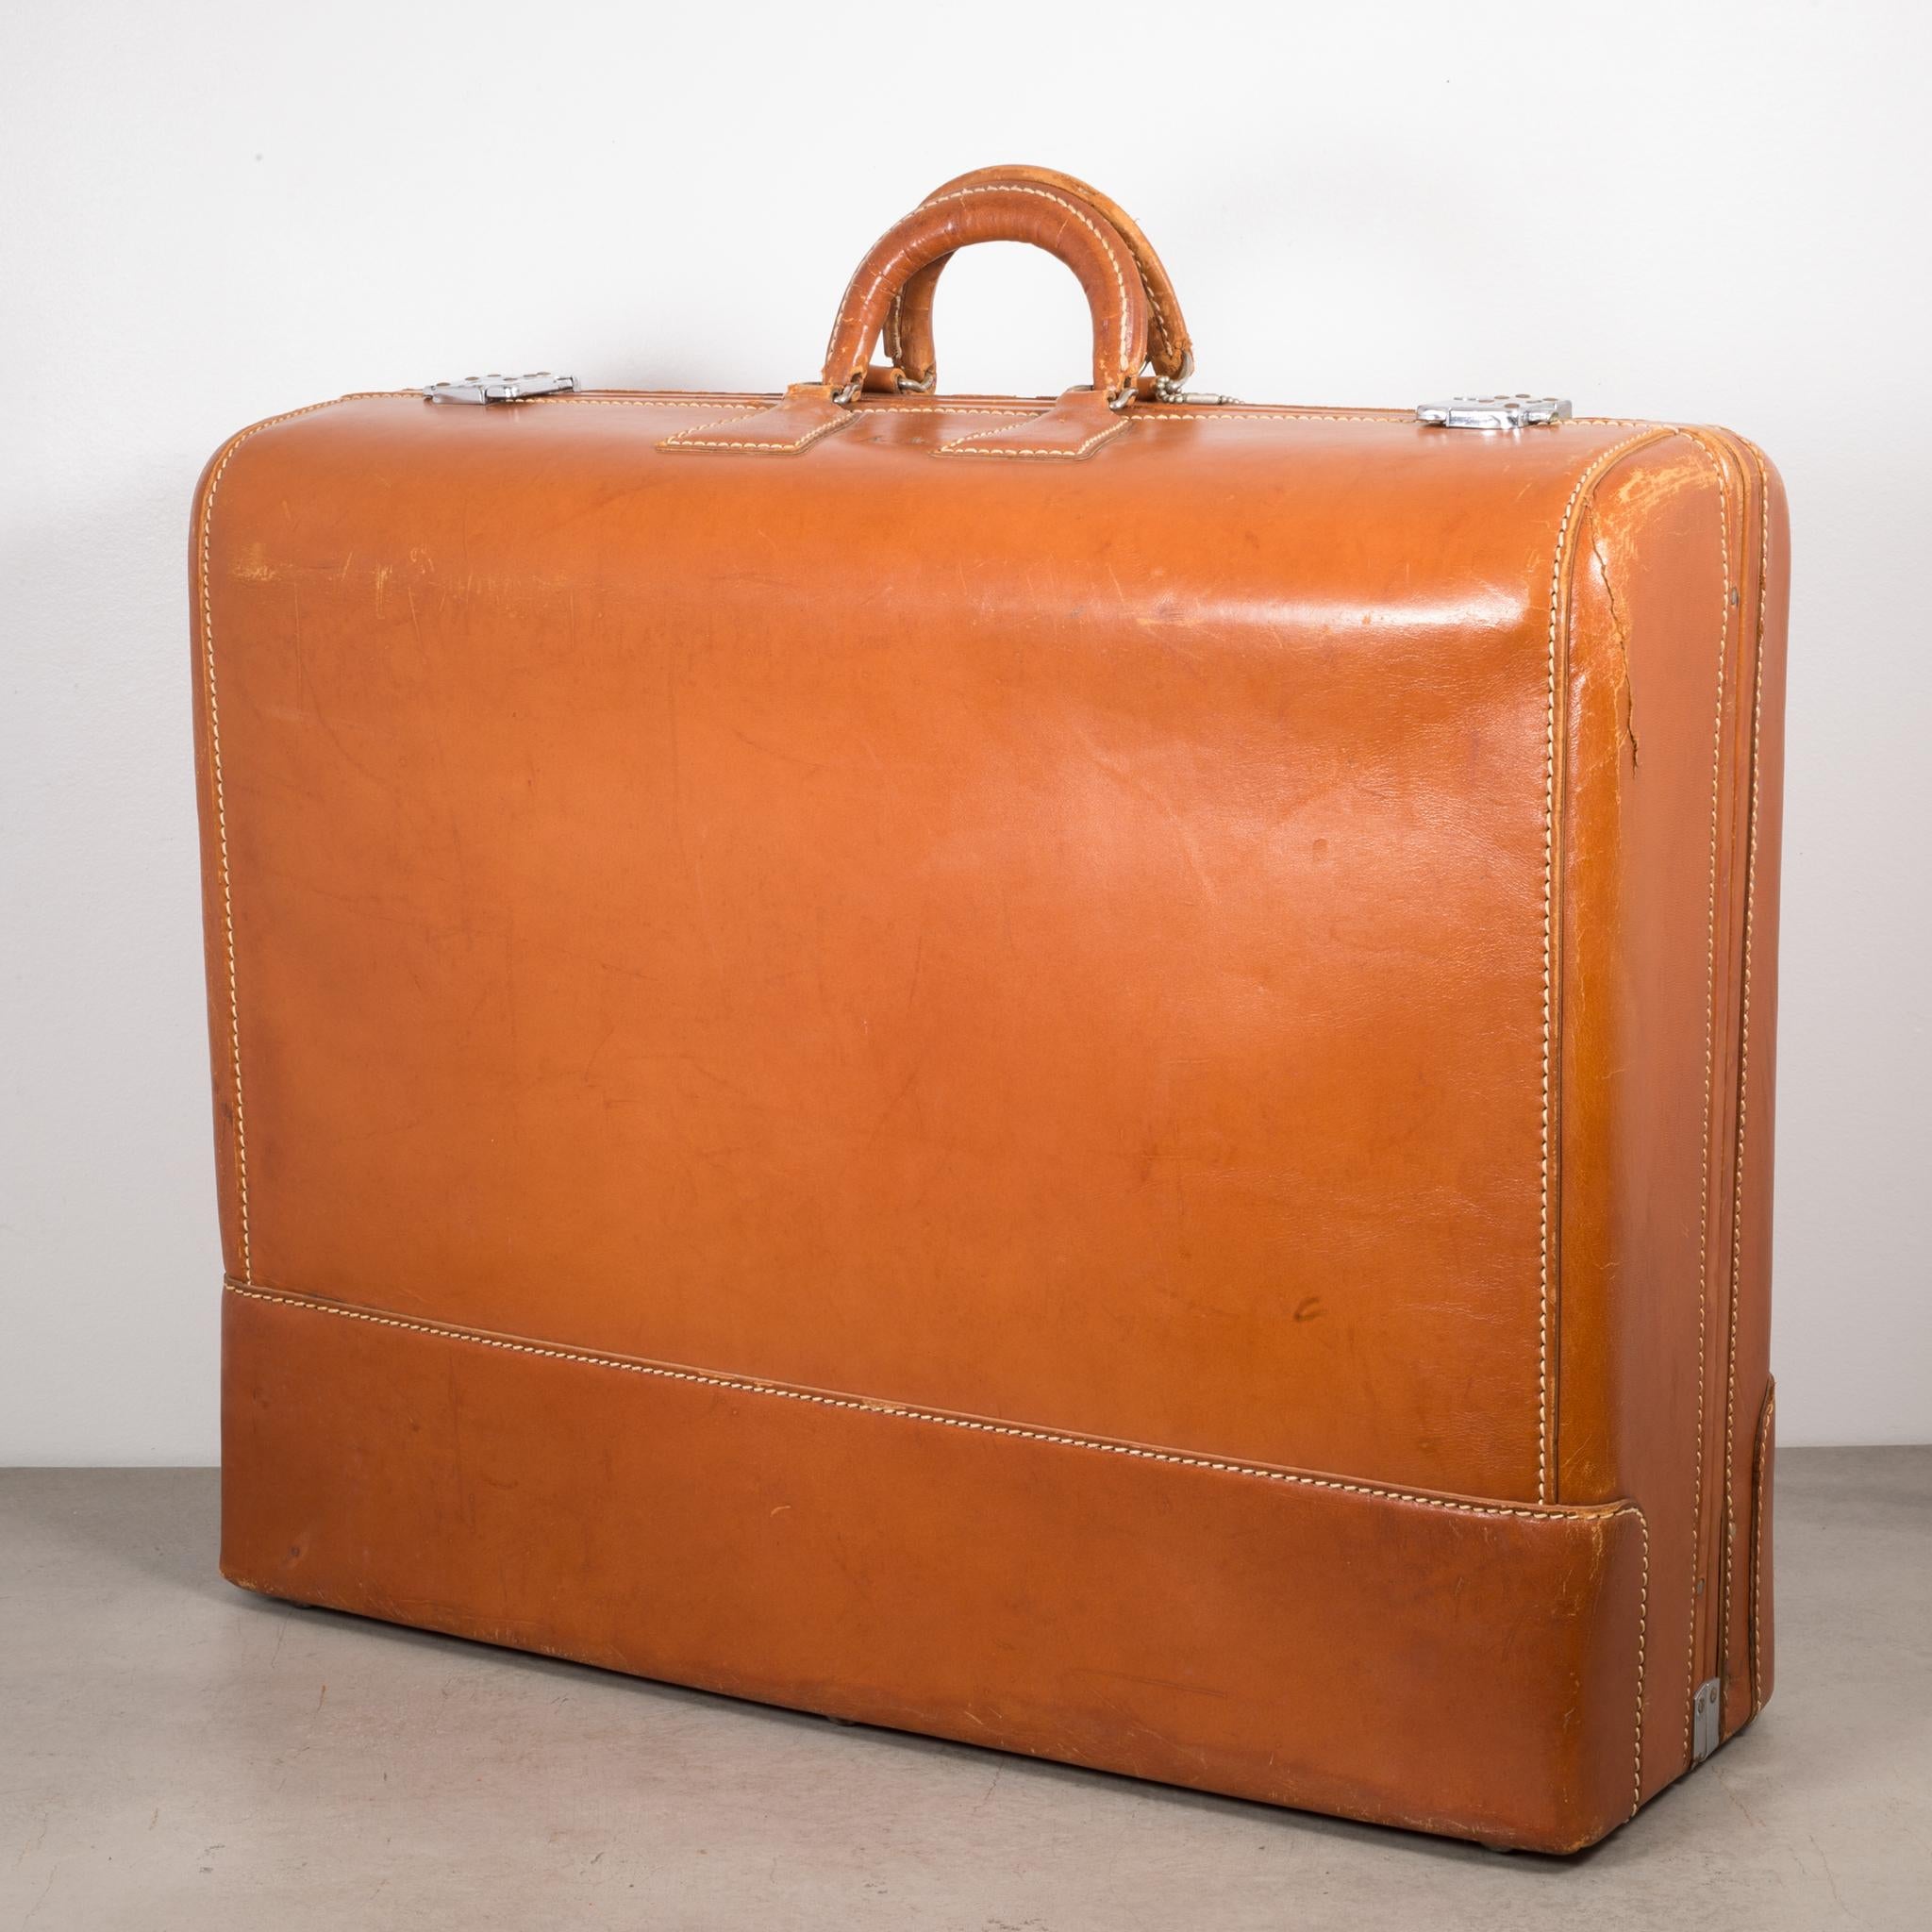 About

This vintage luggage named 